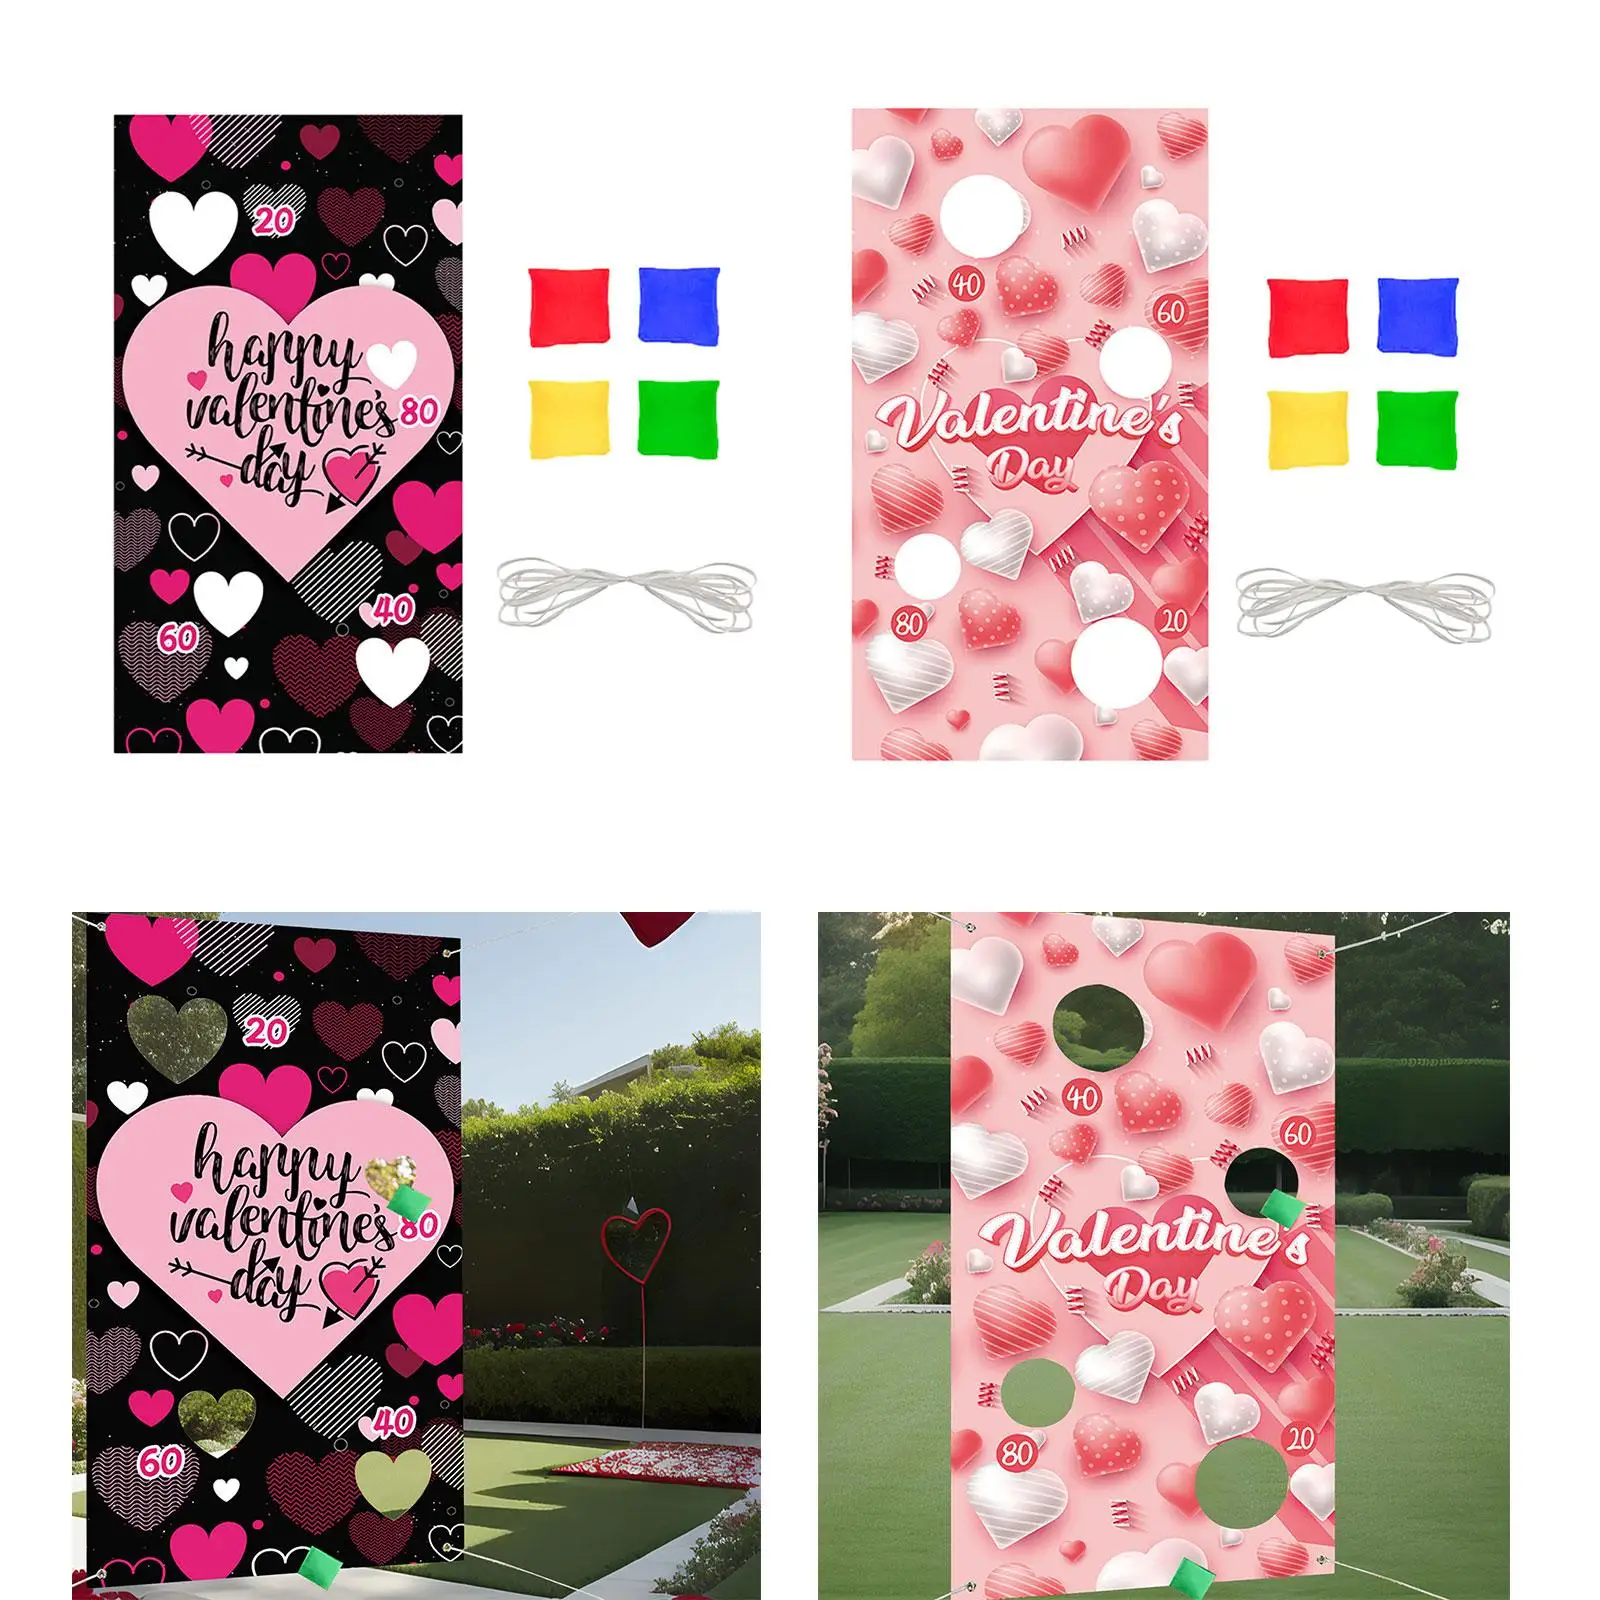 Valentines Hanging Toss Games for Kids Adults Party Decoration Carnivals Family Gathering Outdoor and Indoor with 4 Bean Bags